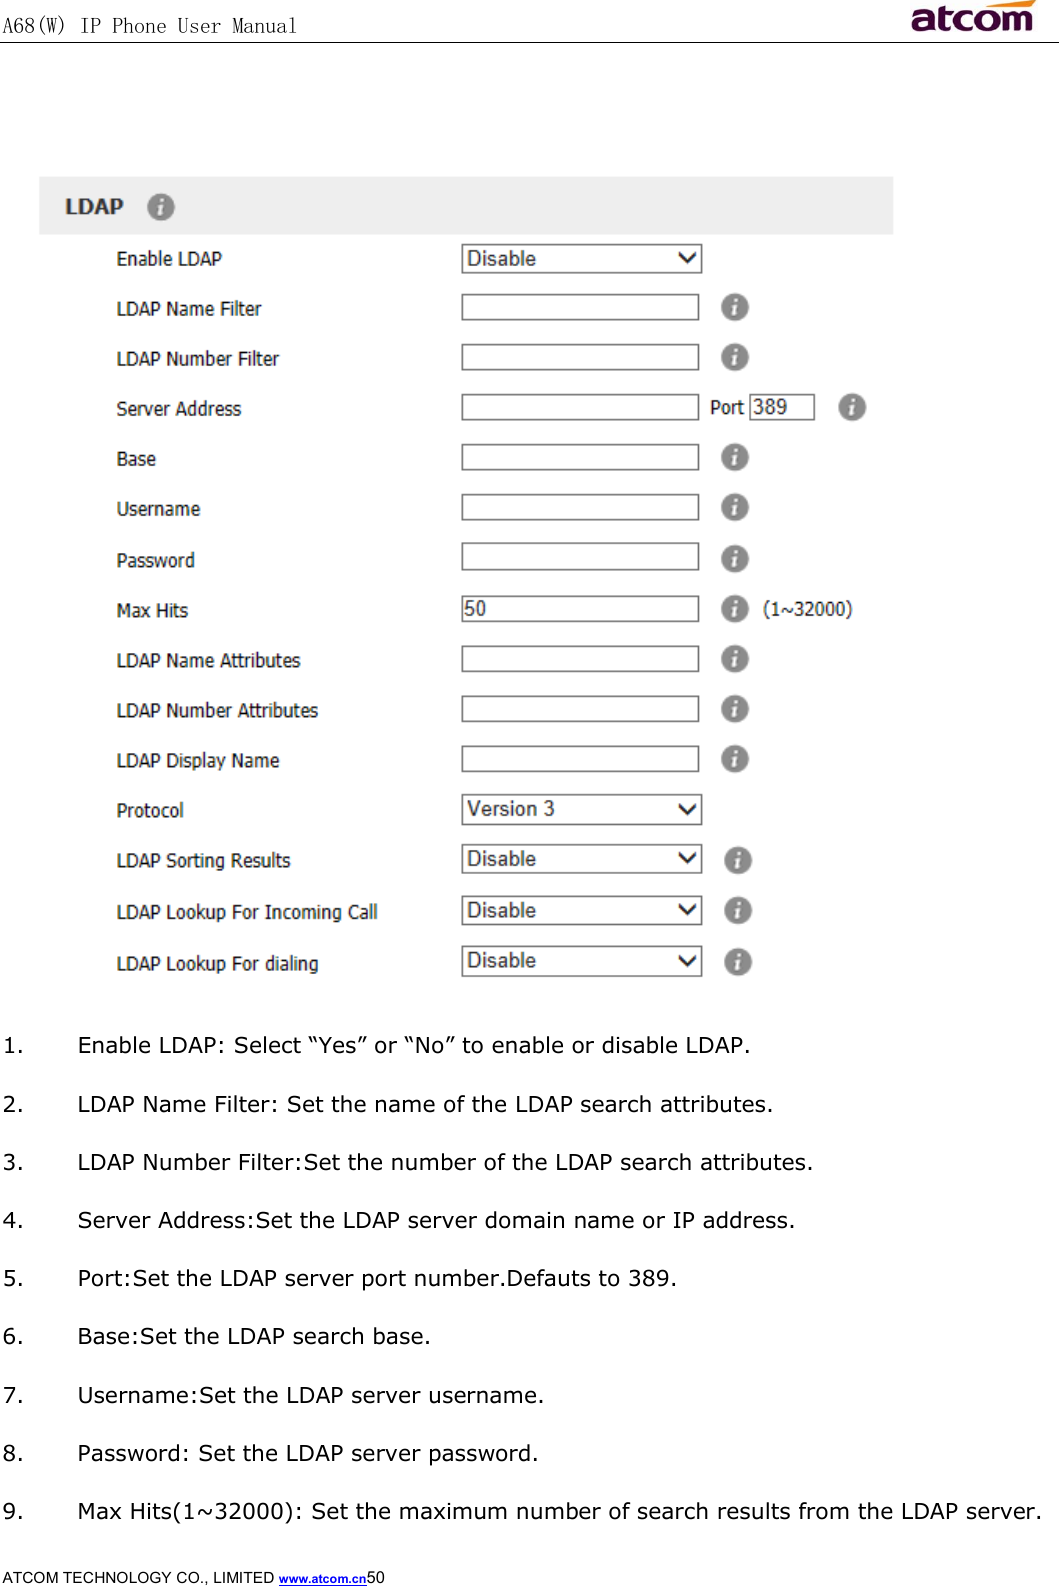 A68(W) IP Phone User Manual                                                           ATCOM TECHNOLOGY CO., LIMITED www.atcom.cn50     1. Enable LDAP: Select “Yes” or “No” to enable or disable LDAP. 2. LDAP Name Filter: Set the name of the LDAP search attributes. 3. LDAP Number Filter:Set the number of the LDAP search attributes. 4. Server Address:Set the LDAP server domain name or IP address. 5. Port:Set the LDAP server port number.Defauts to 389. 6. Base:Set the LDAP search base. 7. Username:Set the LDAP server username. 8. Password: Set the LDAP server password. 9. Max Hits(1~32000): Set the maximum number of search results from the LDAP server. 